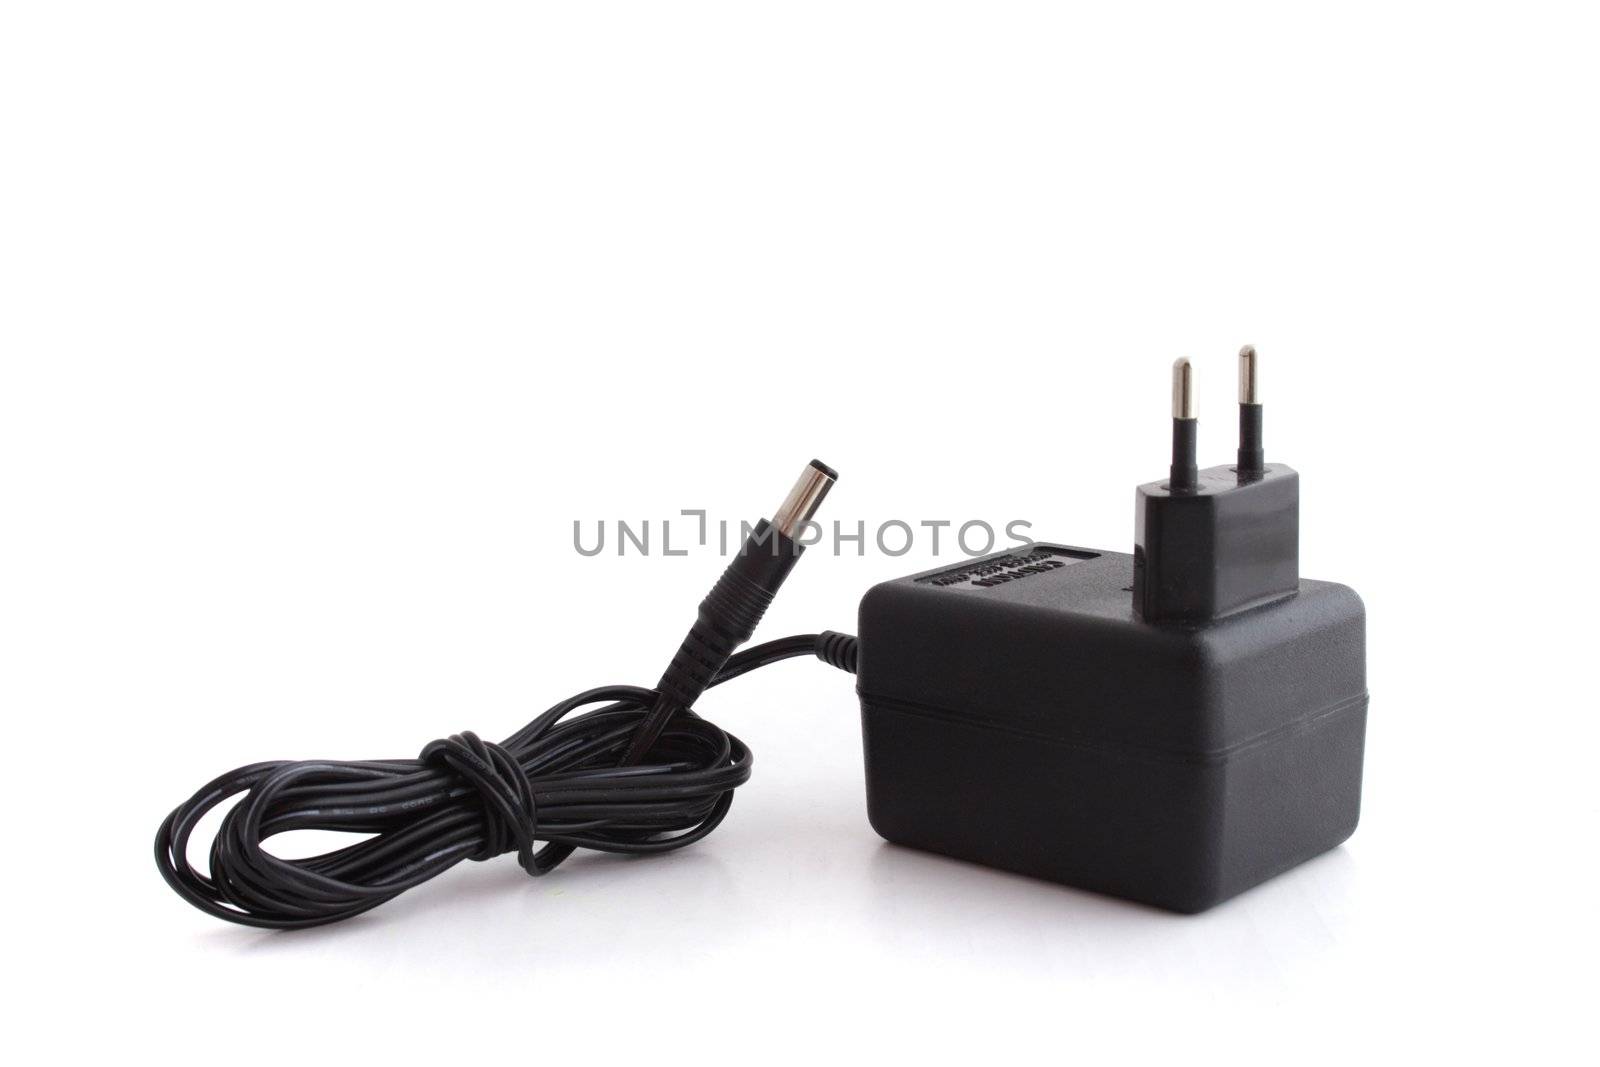 A simple power supply unit. All isolated on white background.
** Note: Shallow depth of field.